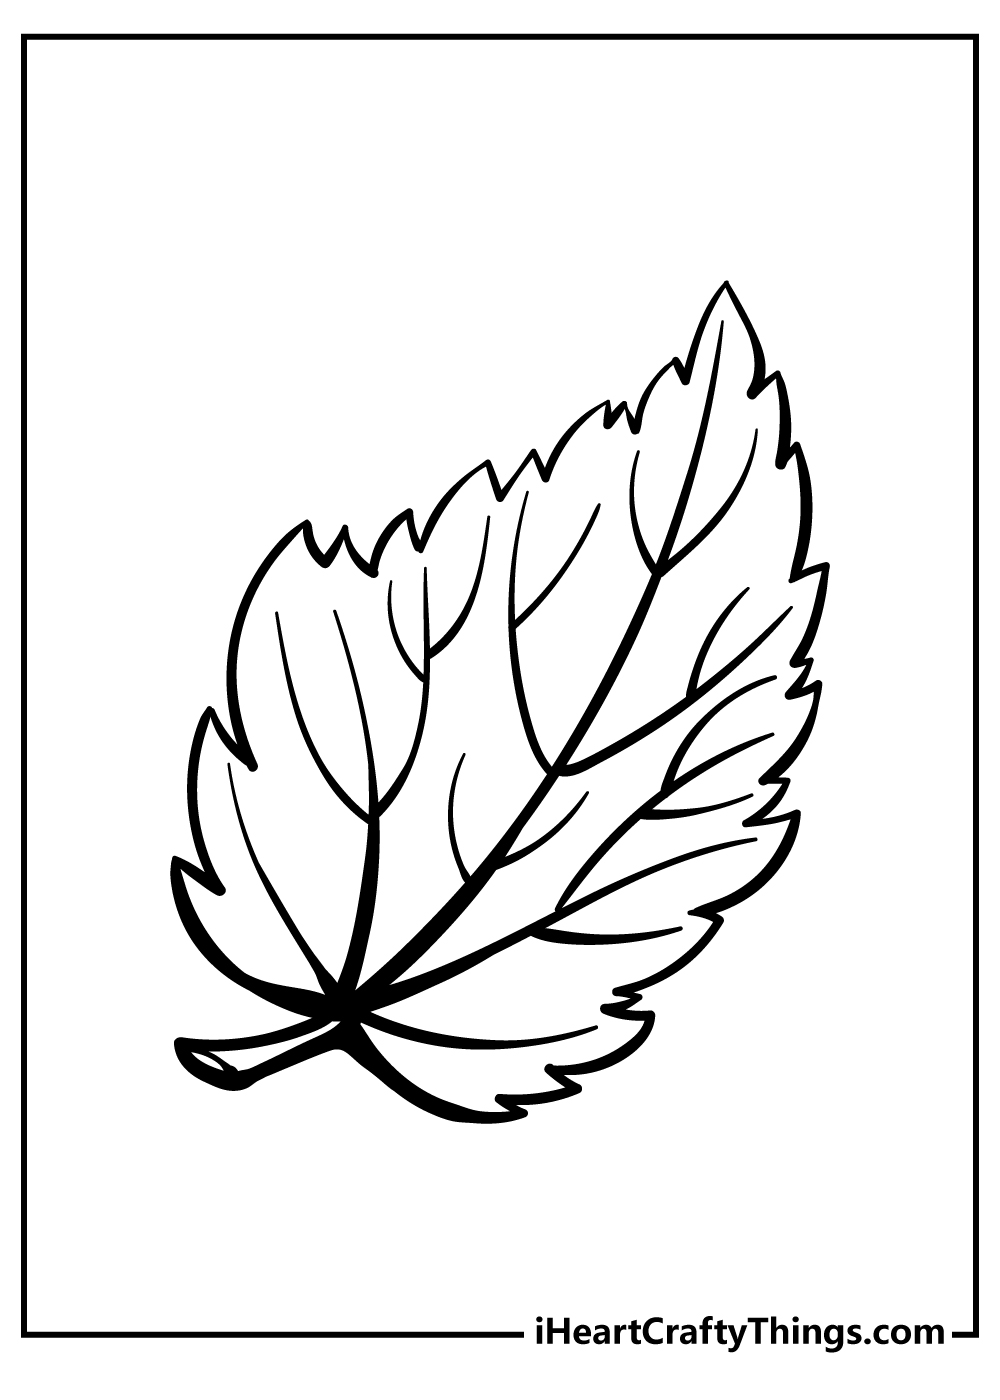 Leaf Coloring Book for adults free download